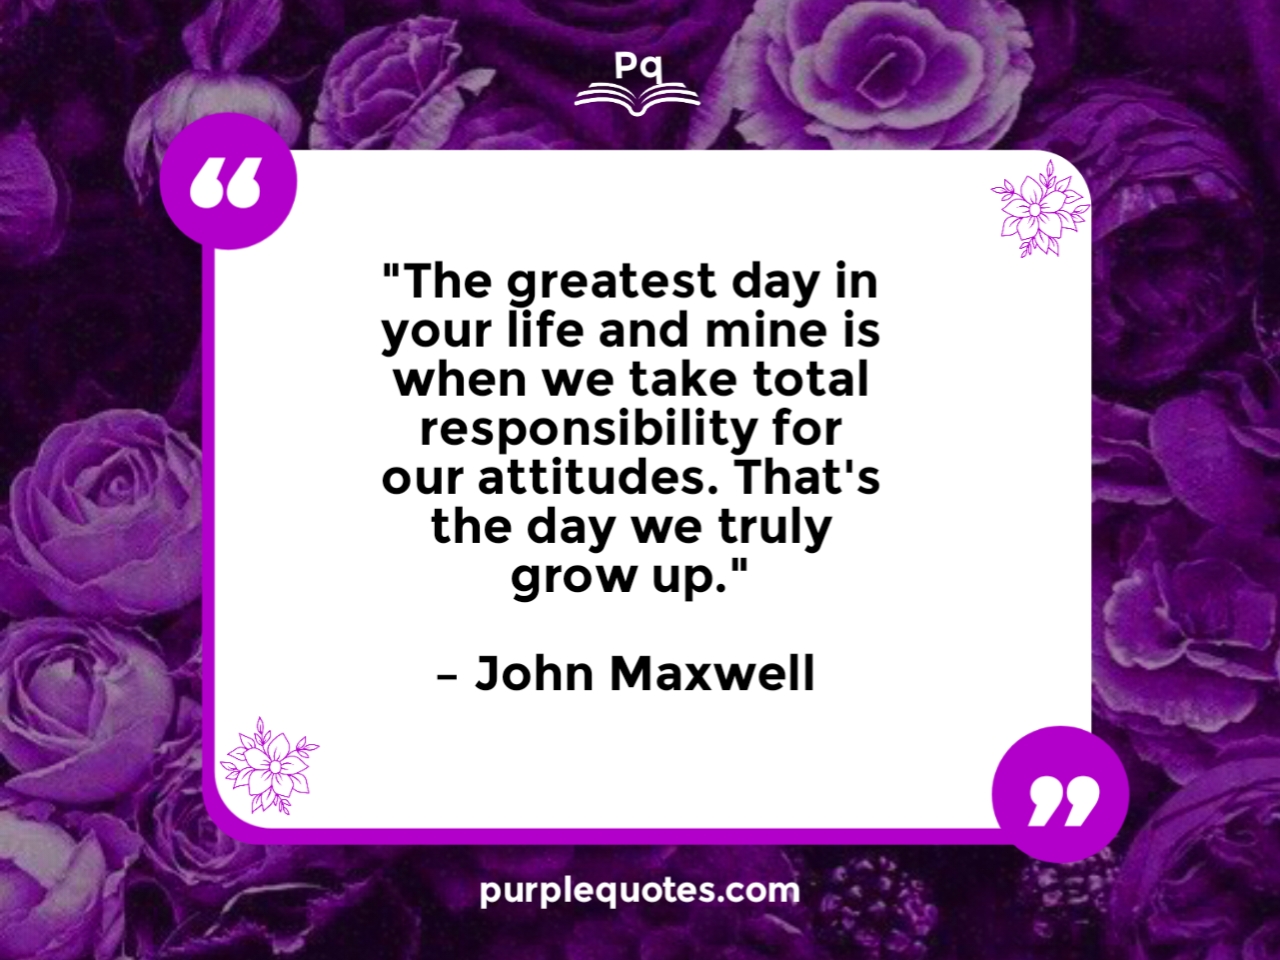 "The greatest day in your life and mine is when we take total responsibility for our attitudes. That's the day we truly grow up."